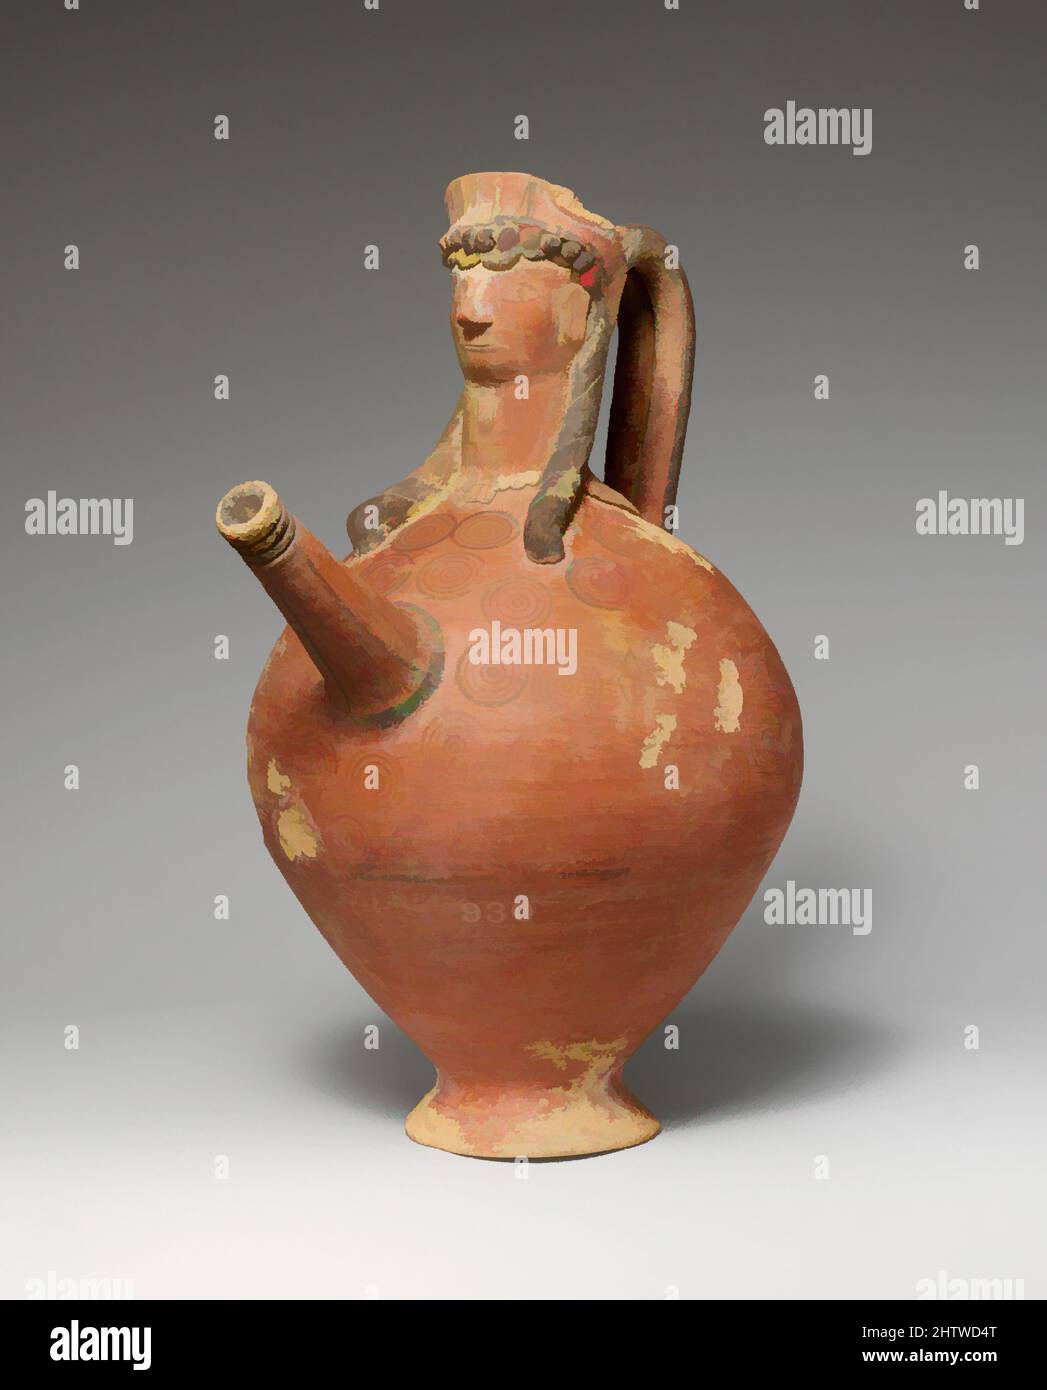 Art inspired by Terracotta trick vase, Cypro-Archaic I, 750–600 B.C., Cypriot, Terracotta, H. 10 1/2 in. (26.7 cm), Vases, The spout and neck are in the form of a woman's head. The 'trick' in the vase consists of a hole in the underside of the foot. When the opening was unplugged, the, Classic works modernized by Artotop with a splash of modernity. Shapes, color and value, eye-catching visual impact on art. Emotions through freedom of artworks in a contemporary way. A timeless message pursuing a wildly creative new direction. Artists turning to the digital medium and creating the Artotop NFT Stock Photo